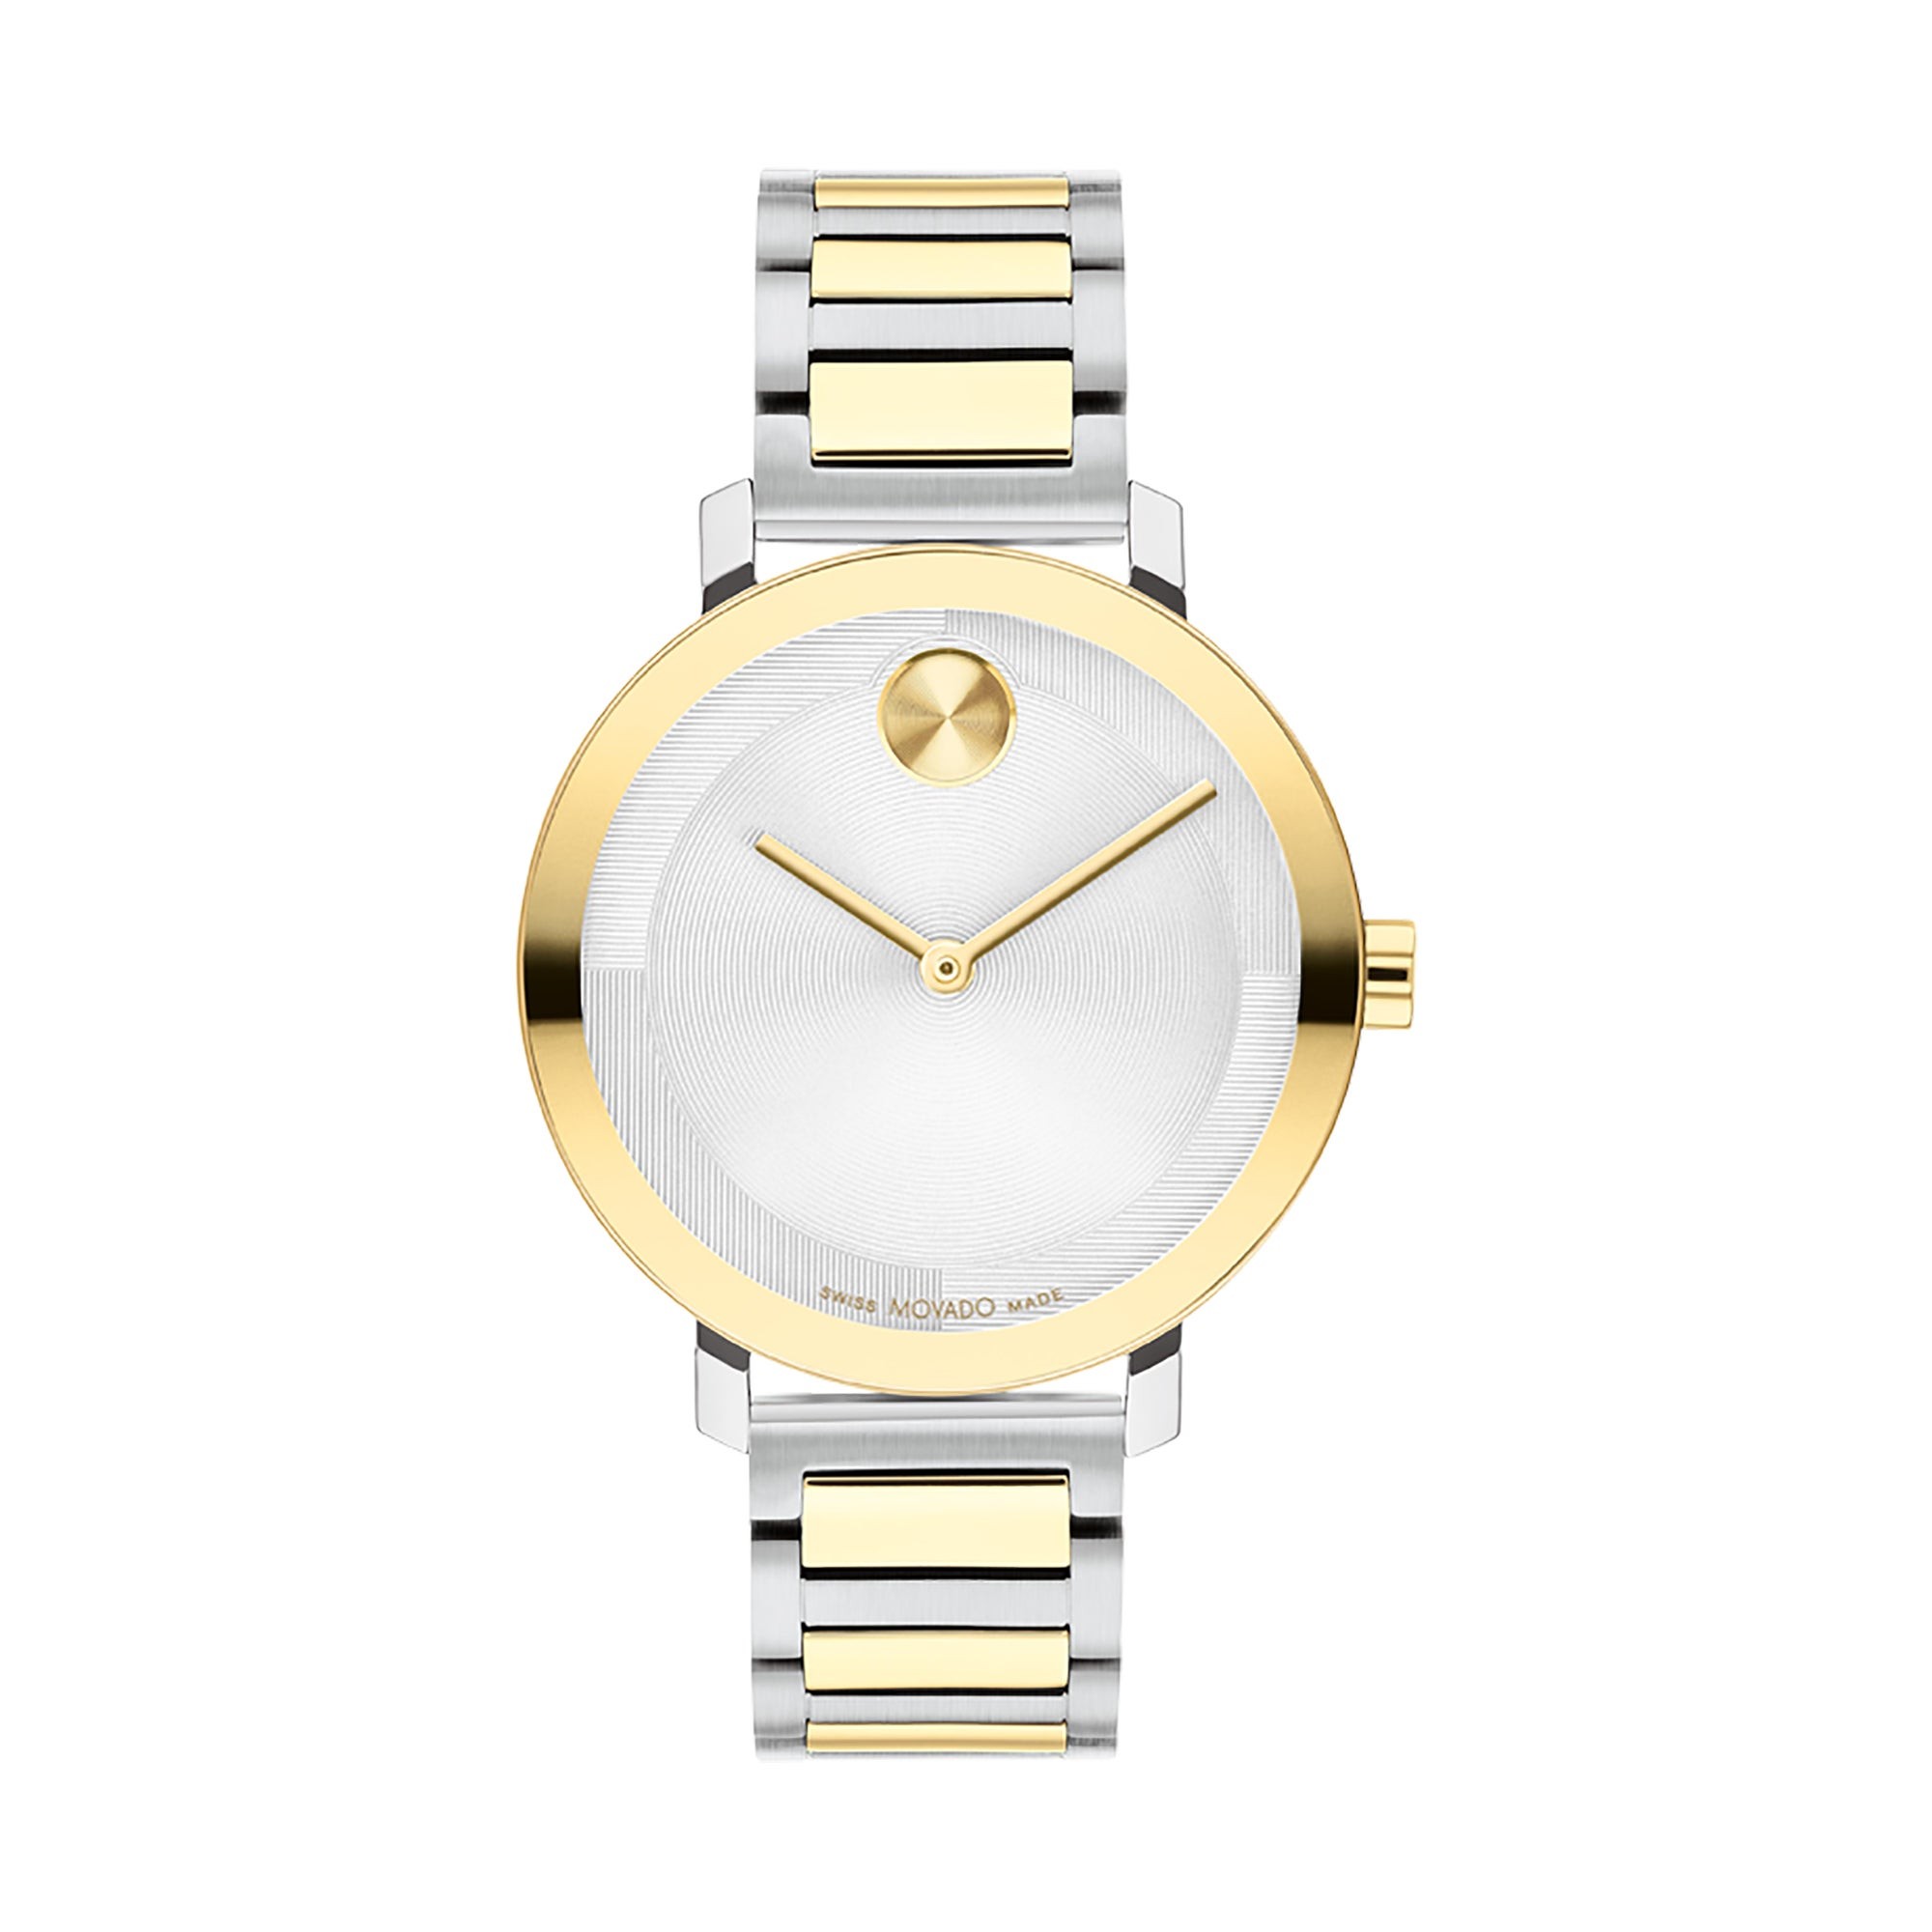 Ladies' Bold Evolution 2.0 Two-Tone Stainless Steel Watch, Silver Dial